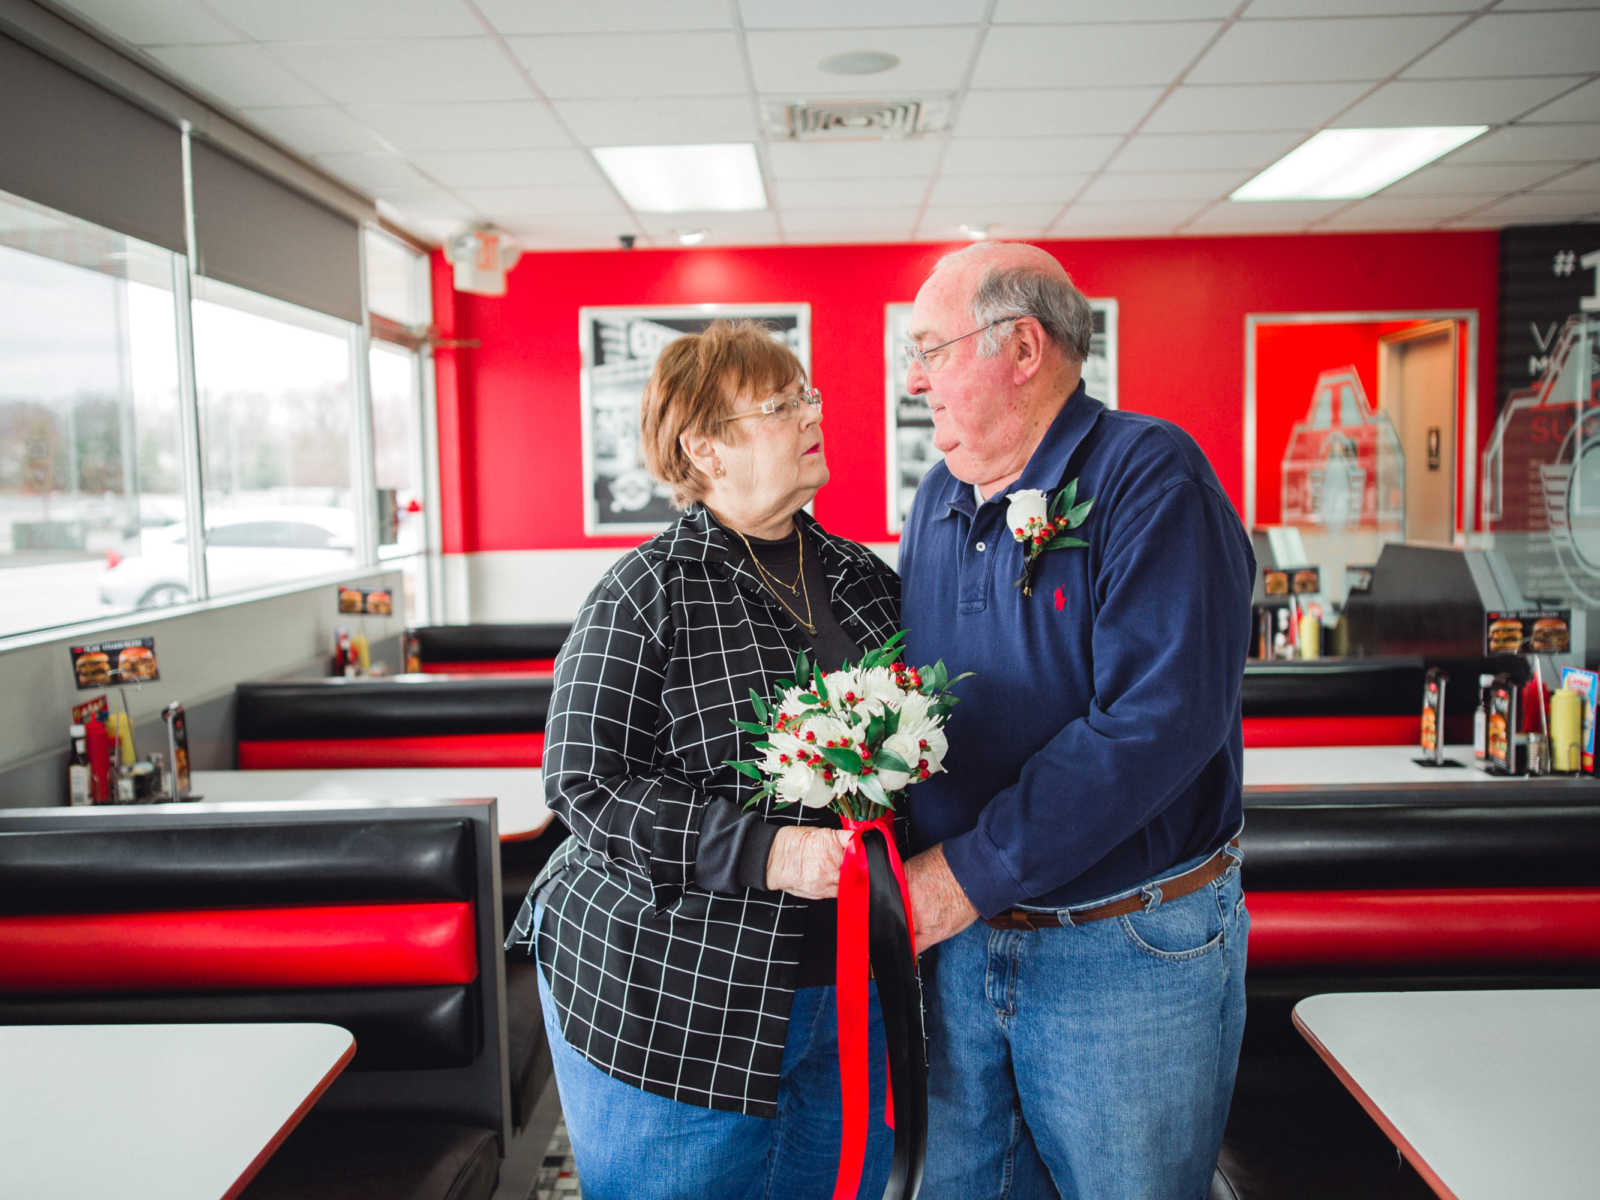 Husband and wife who met at Steak 'n Shake in 1962 stand holding a bouquet of flowers in restaurant